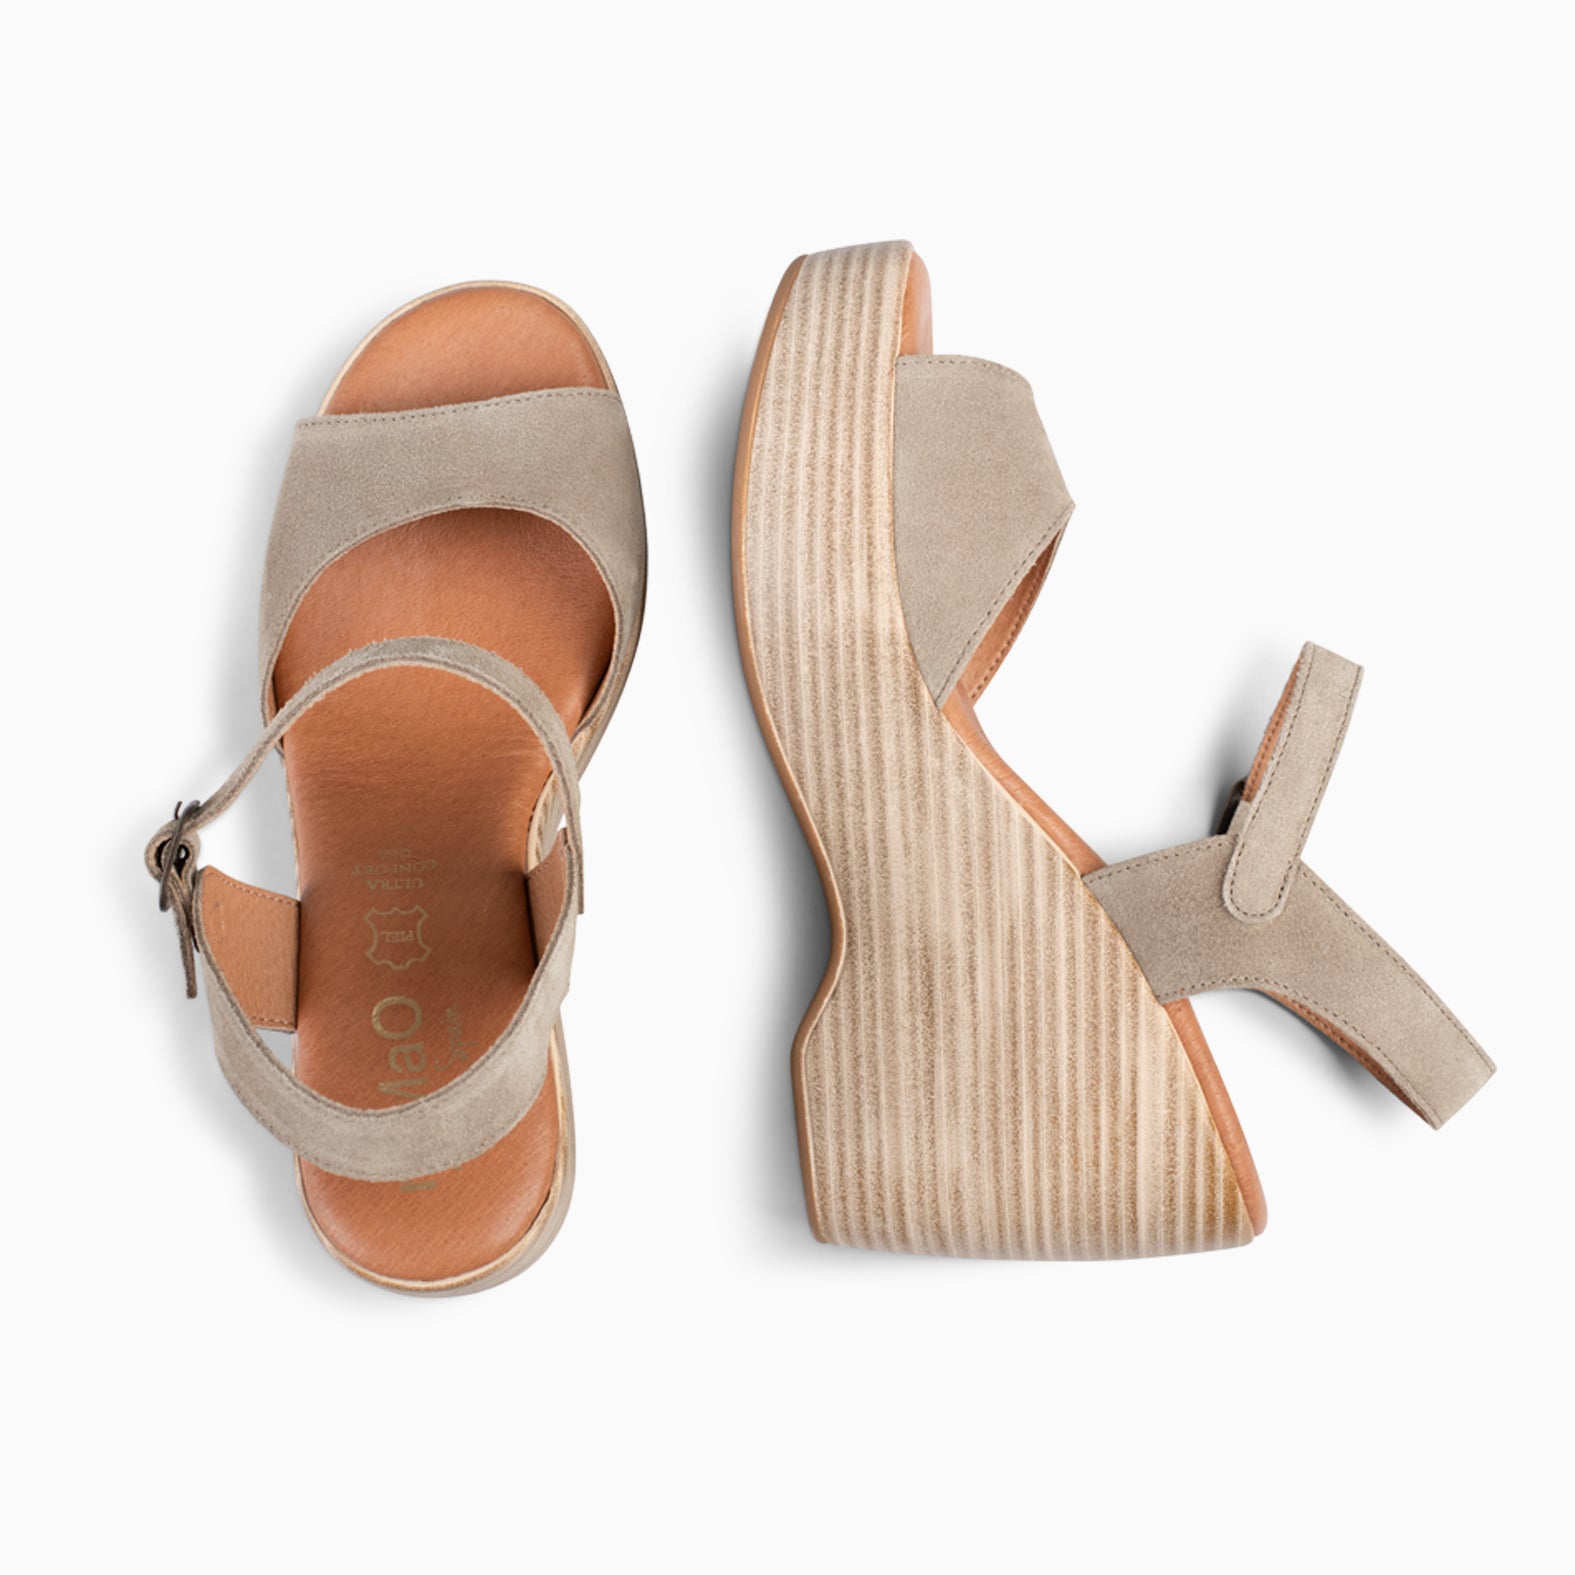 SIDNEY – TAUPE wedge sandals